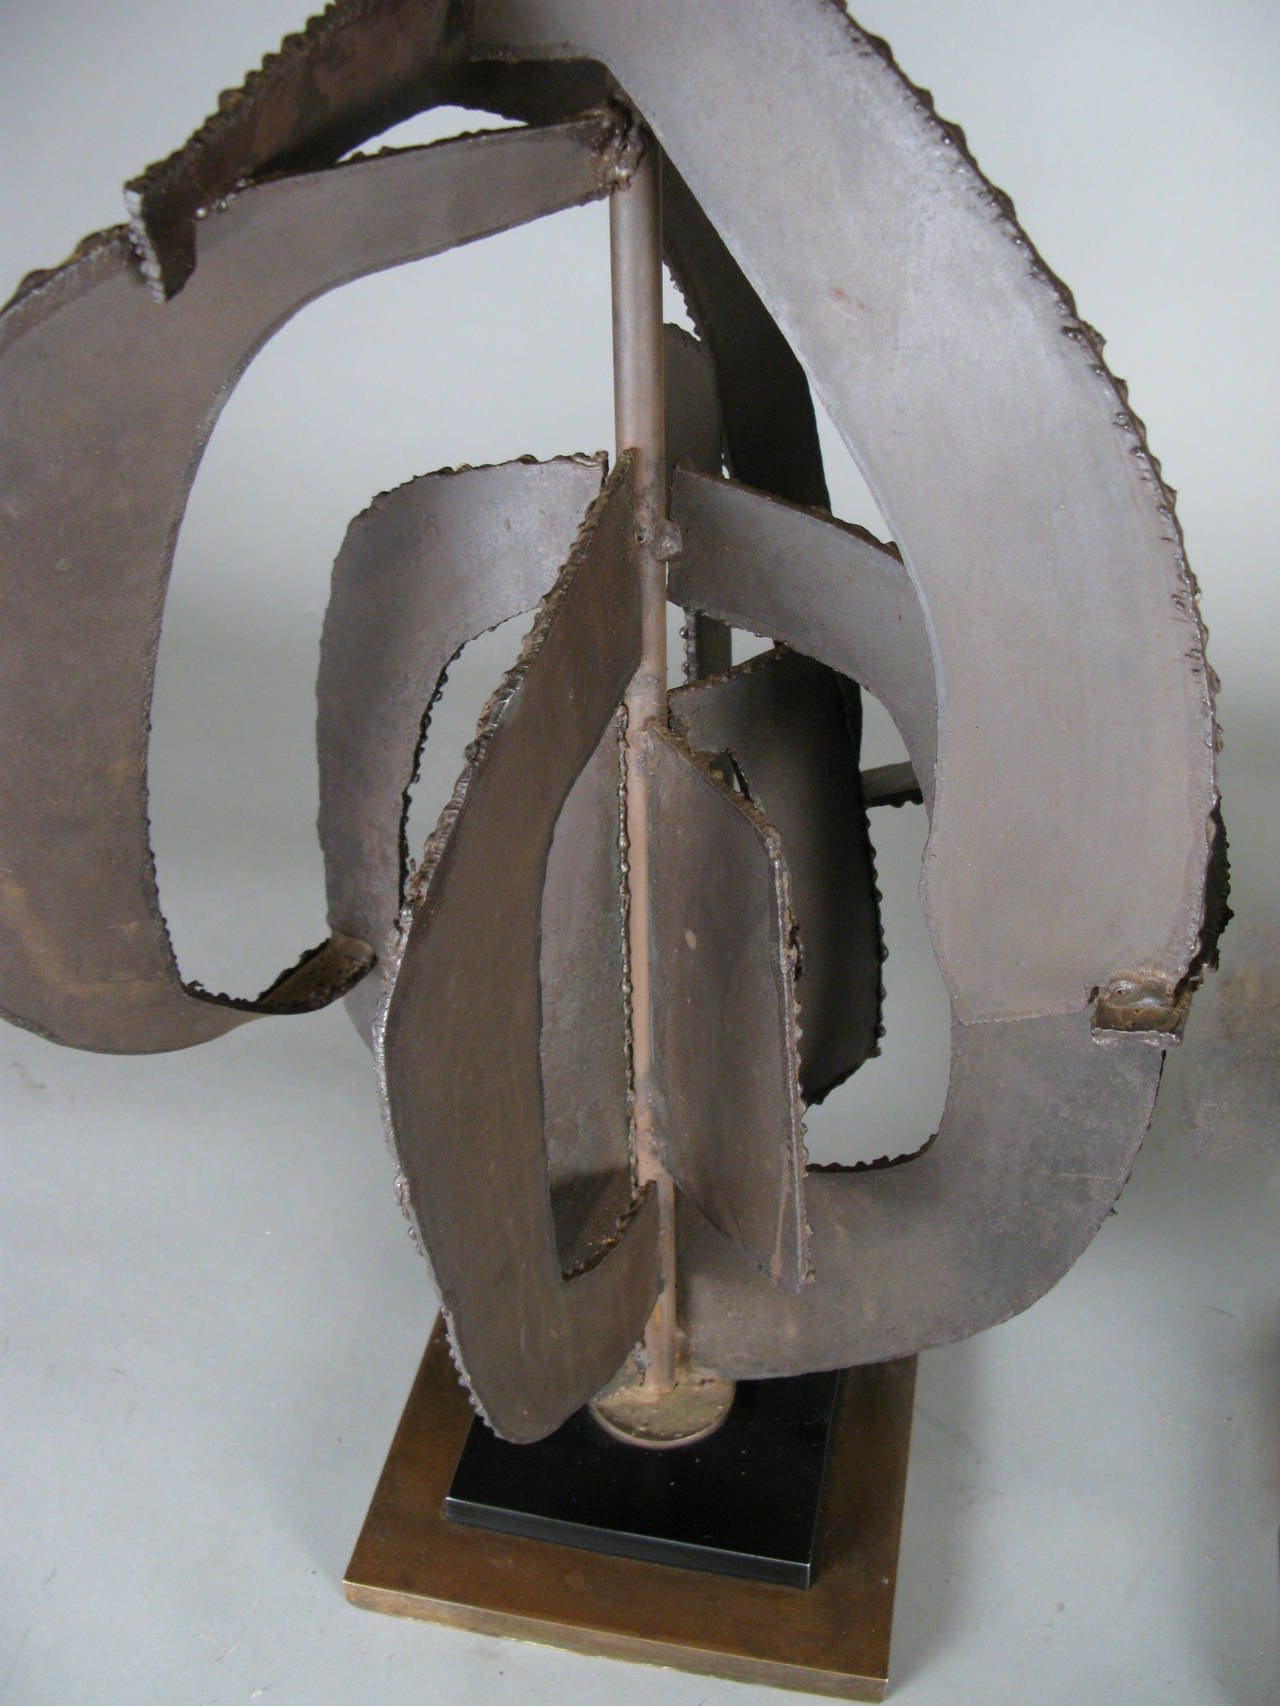 A very nice example of the best of Harry Balmer's sculptural torch-cut steel and iron lamps designed for Flemington Ironworks. Beautiful abstract design, mounted on a steel and copper base. Excellent condition, shade not included.